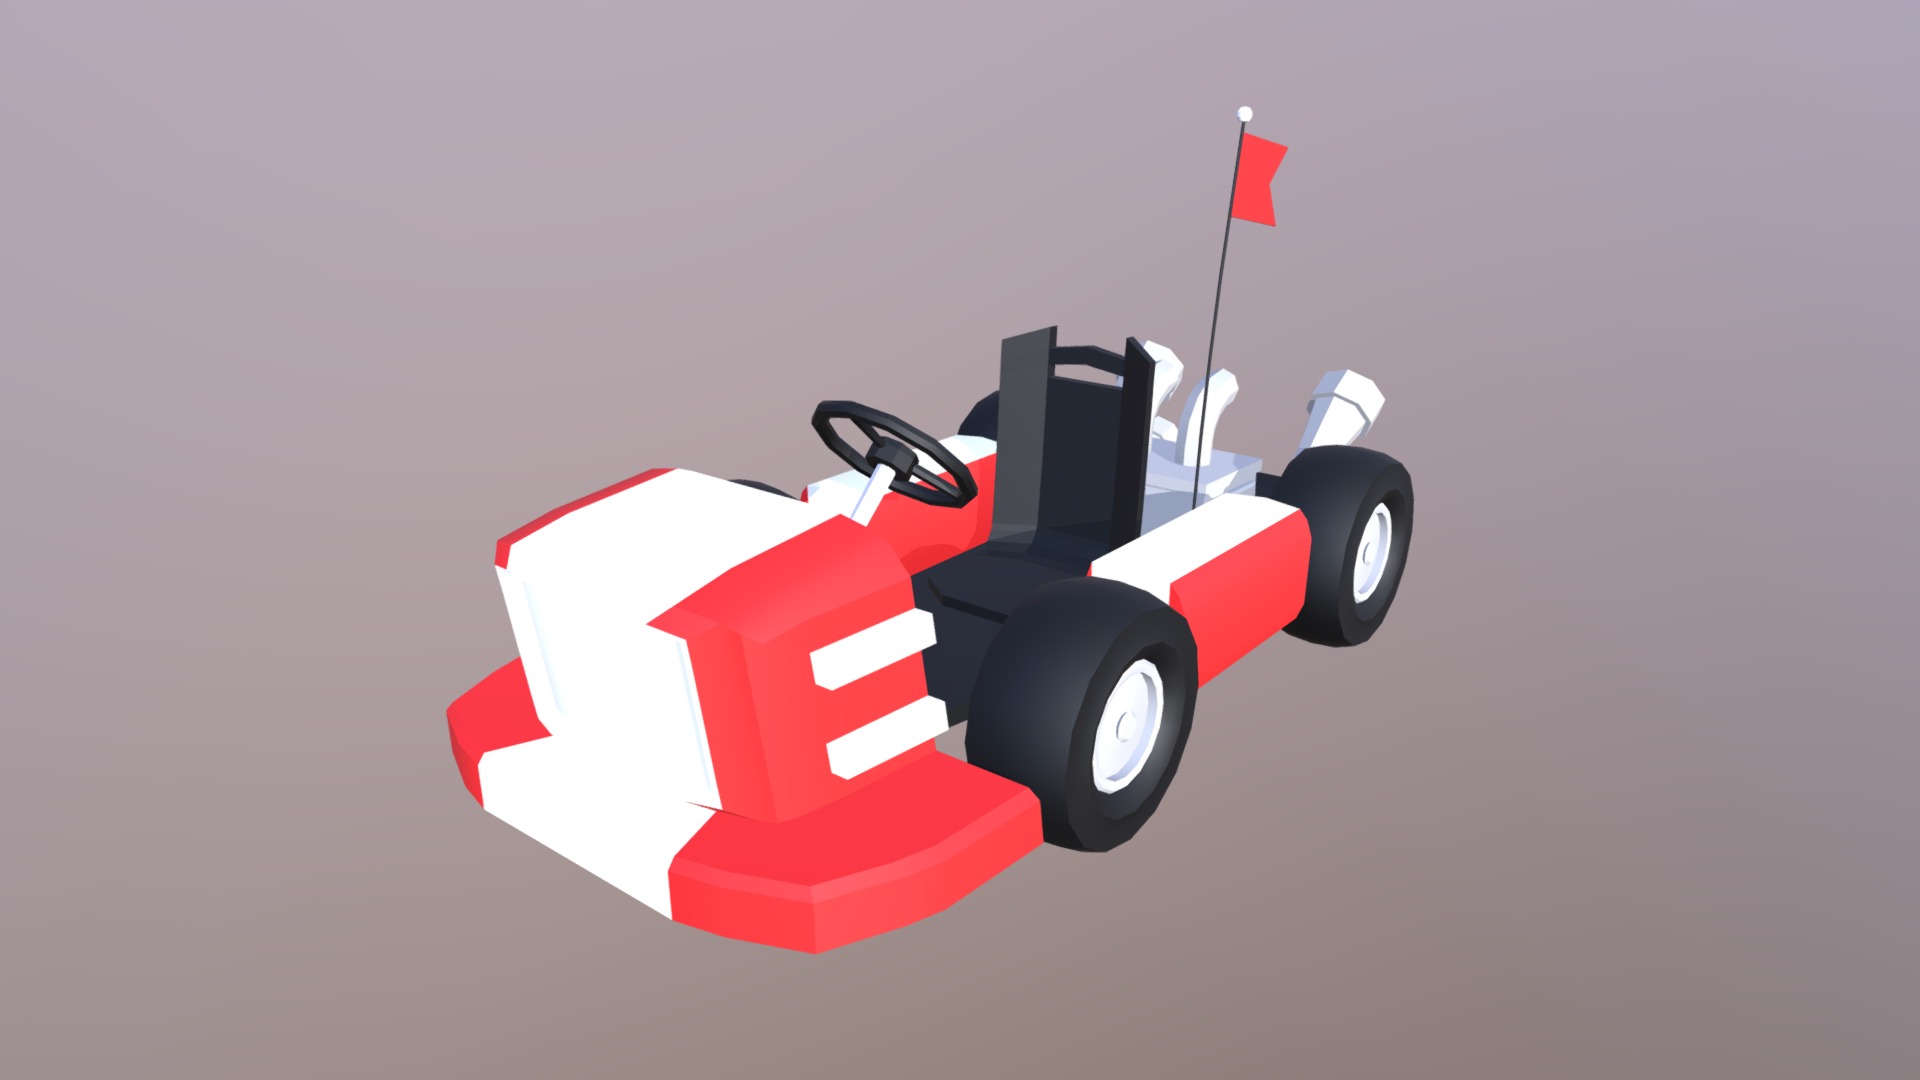 3D model Off Road Mini Kart 2 – Low Poly - This is a 3D model of the Off Road Mini Kart 2 - Low Poly. The 3D model is about a red and black toy car.